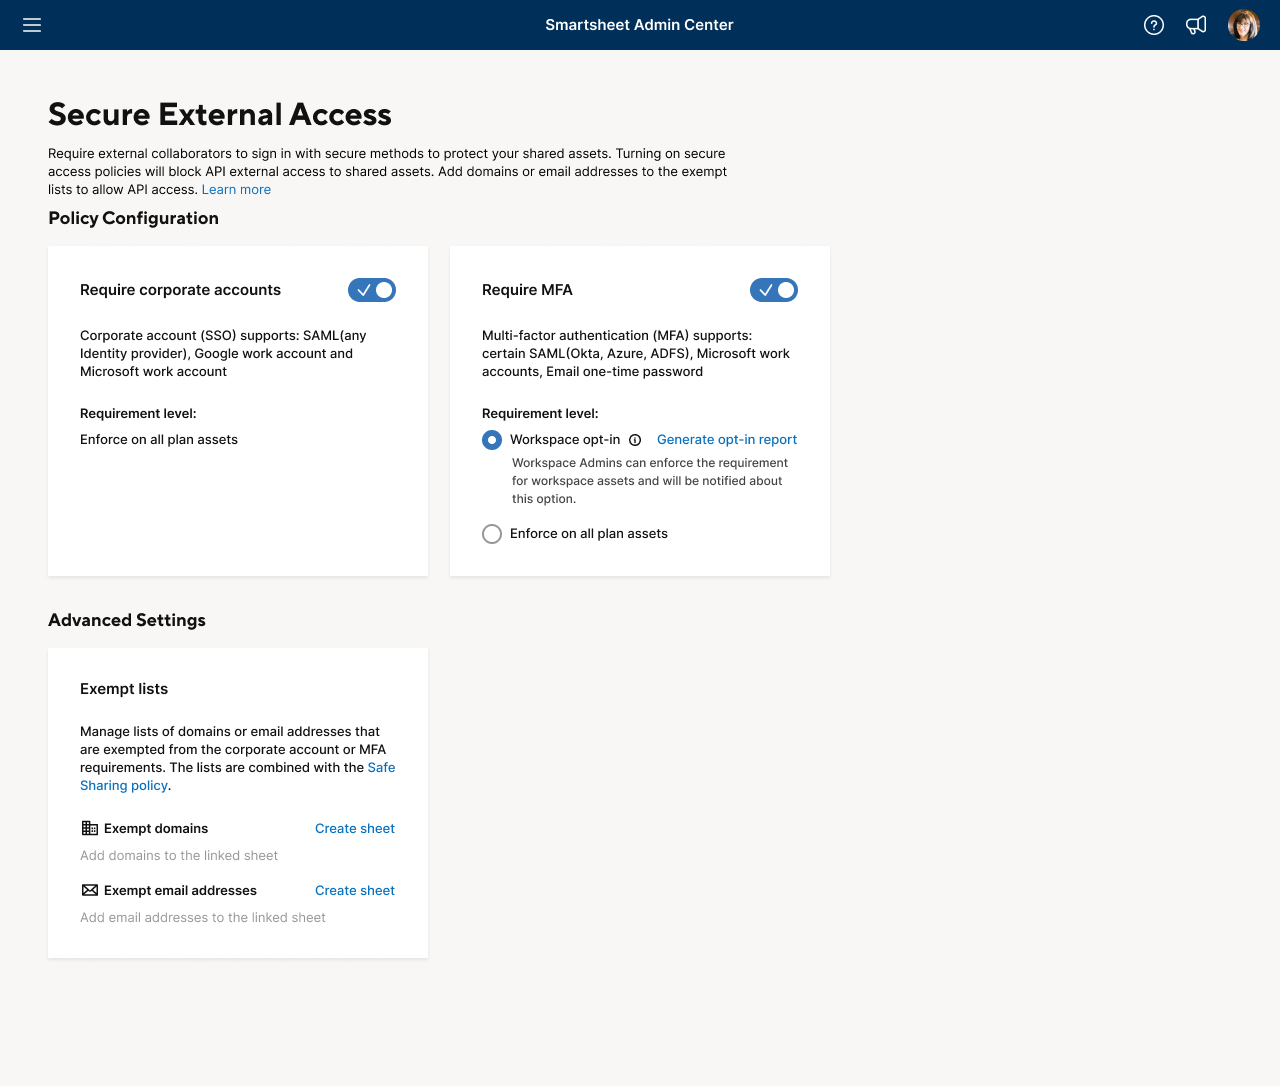 Secure External Access page